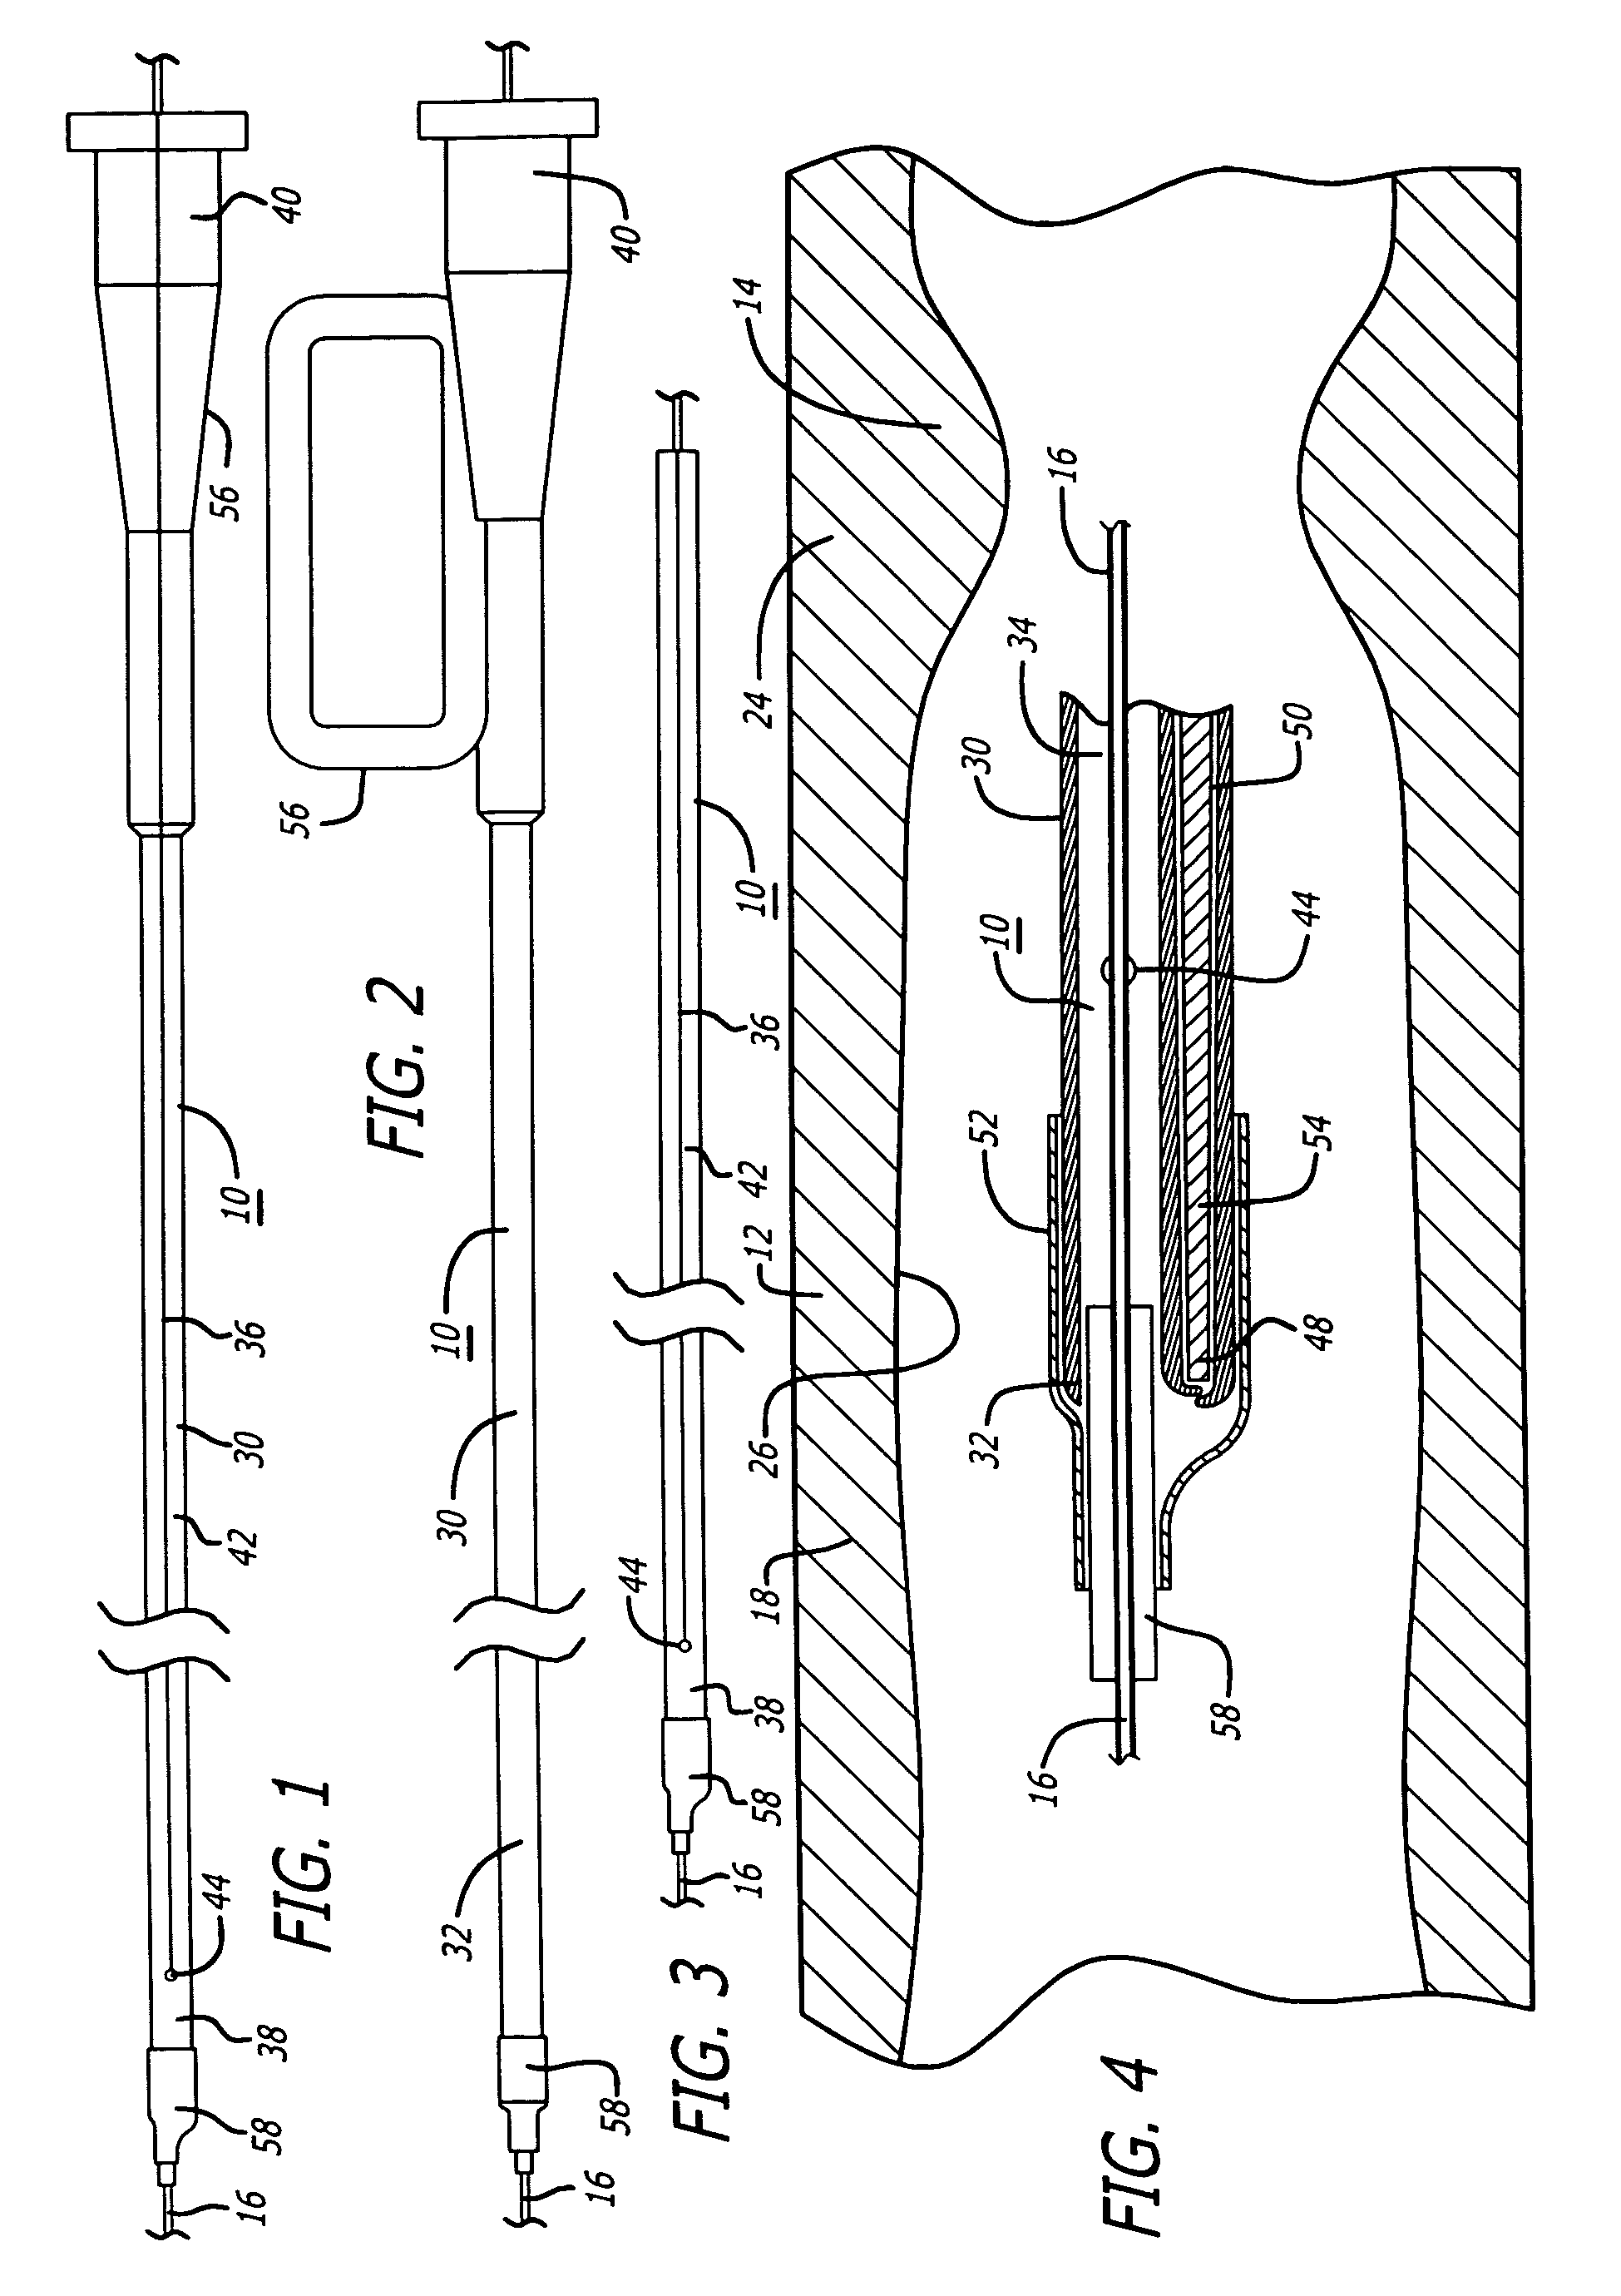 Delivery and recovery systems having steerability and rapid exchange operating modes for embolic protection systems